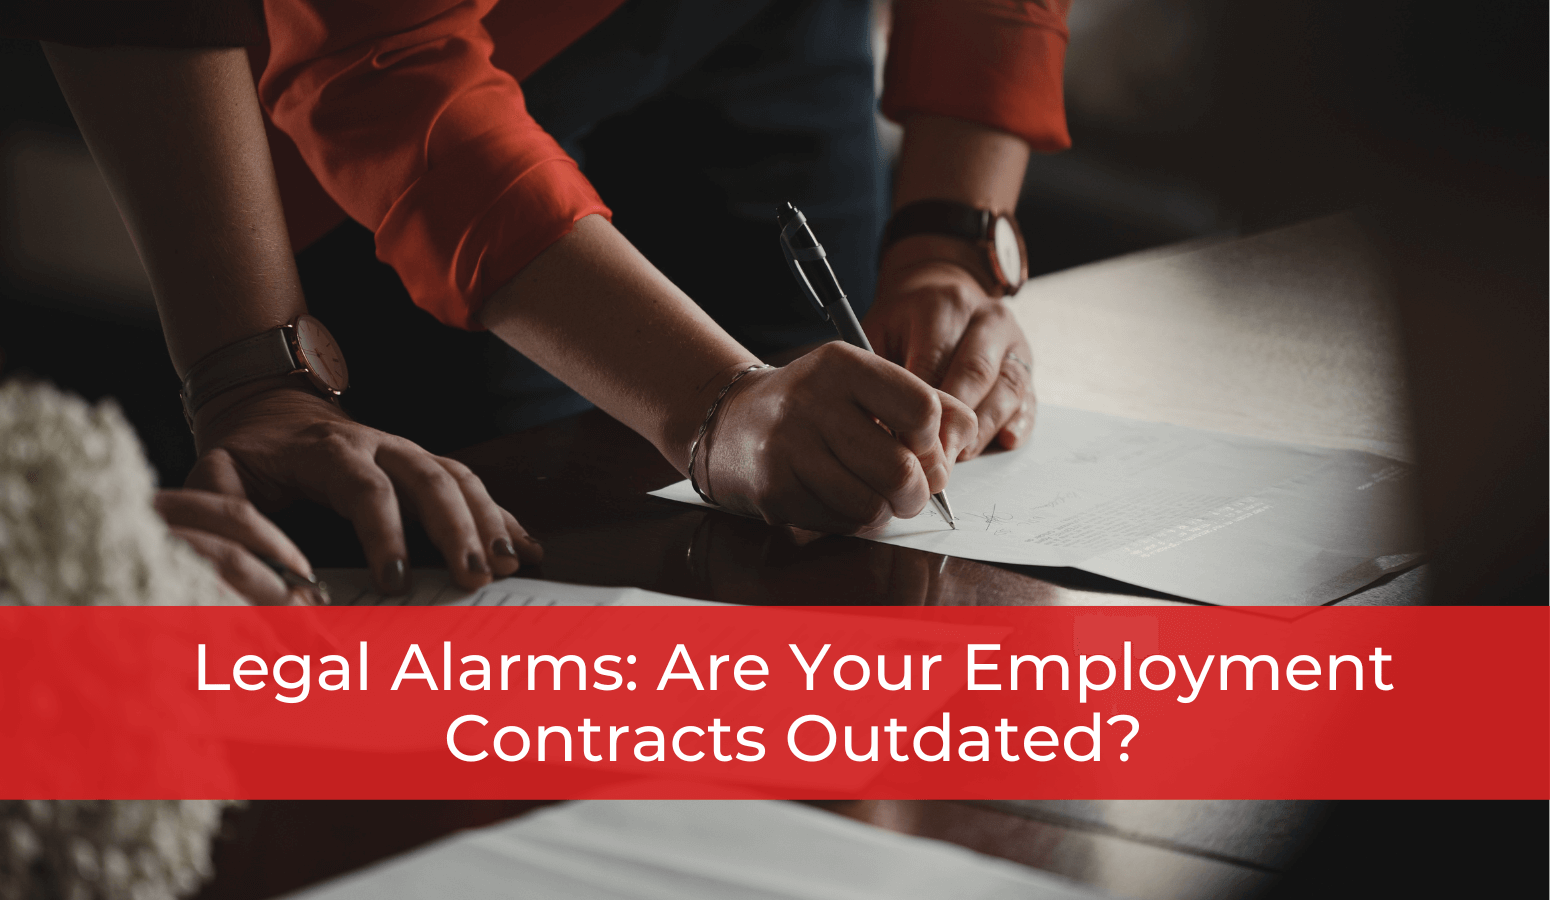 Featured image for “Legal Alarms: Are Your Employment Contracts Outdated?”